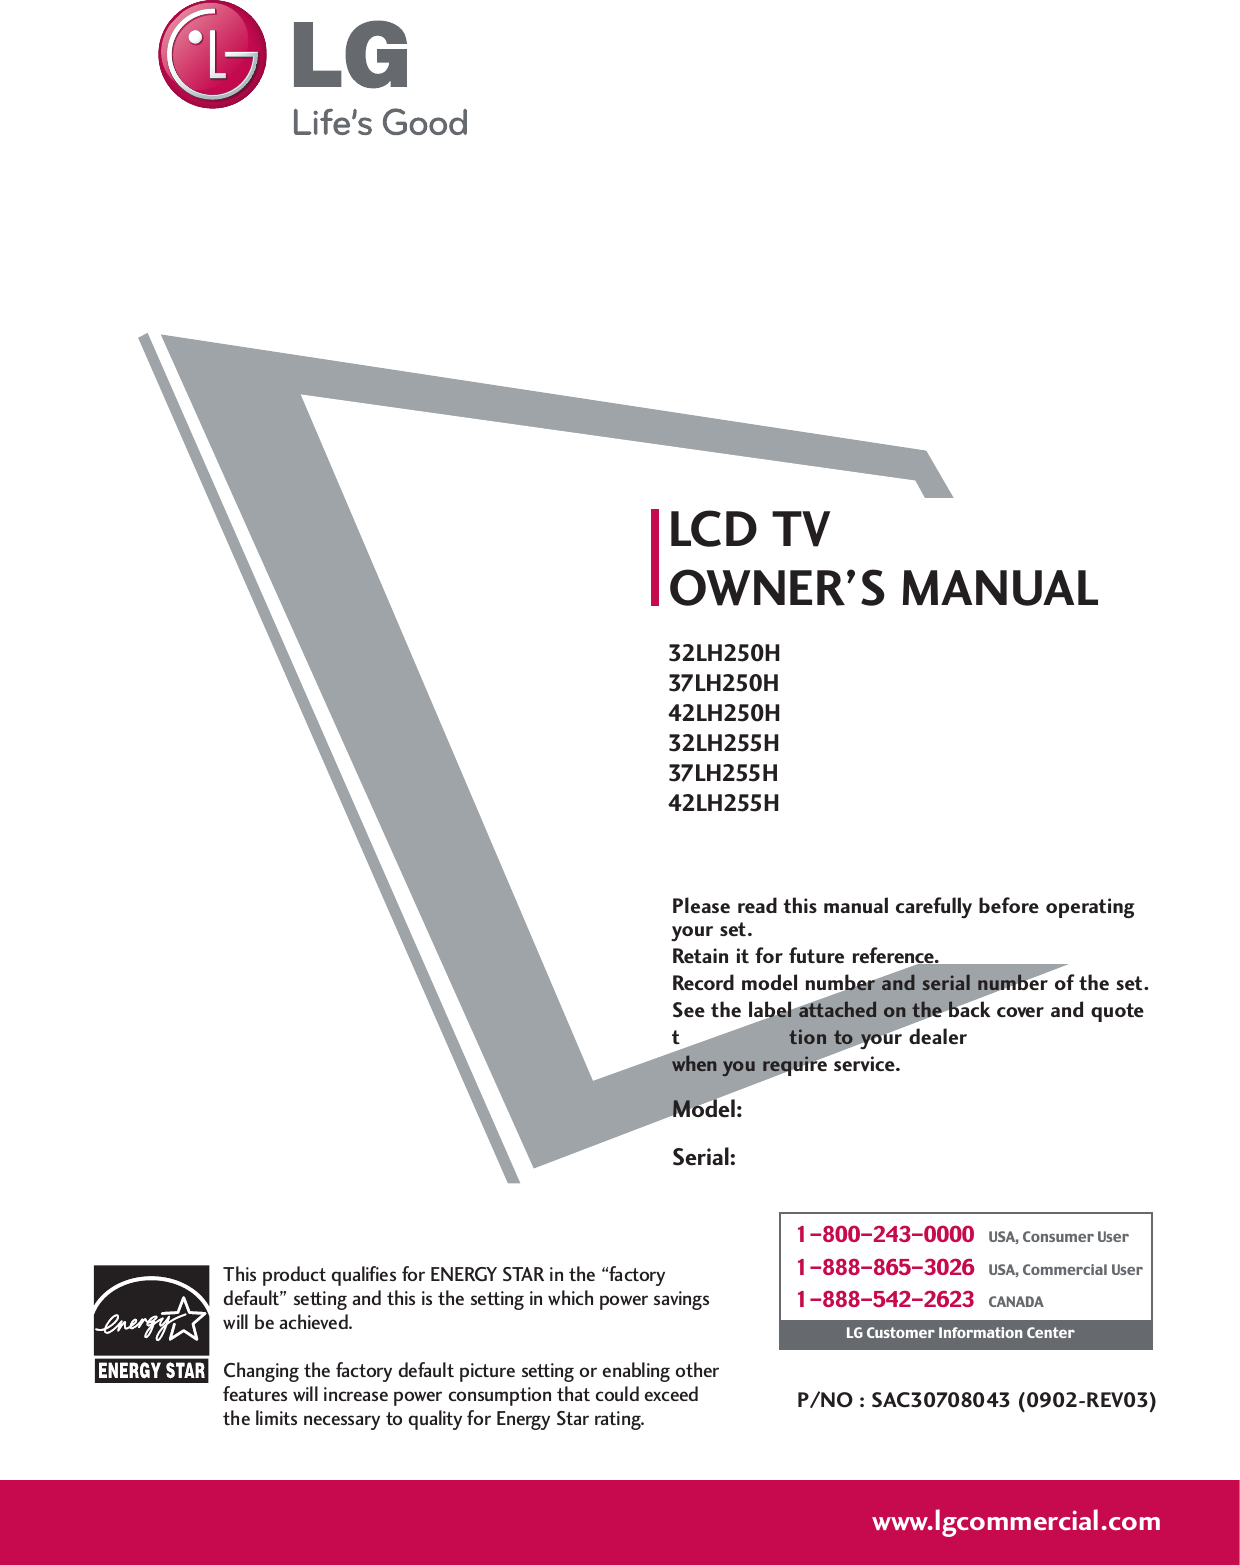 Please read this manual carefully before operatingyour set. Retain it for future reference.Record model number and serial number of the set. See the label attached on the back cover and quote this  informa tion to your dealer when you require service.LCD TVOWNER’S MANUAL32LH250H37LH250H42LH250H32LH255H37LH255H42LH255HP/NO : SAC30708043 (0902-REV03)www.lgcommercial.comThis product qualifies for ENERGY STAR in the “factorydefault” setting and this is the setting in which power savingswill be achieved.Changing the factory default picture setting or enabling otherfeatures will increase power consumption that could exceedthe limits necessary to quality for Energy Star rating.1-800-243-0000   USA, Consumer User1-888-865-3026   USA, Commercial User1-888-542-2623   CANADALG Customer Information CenterModel:Serial: